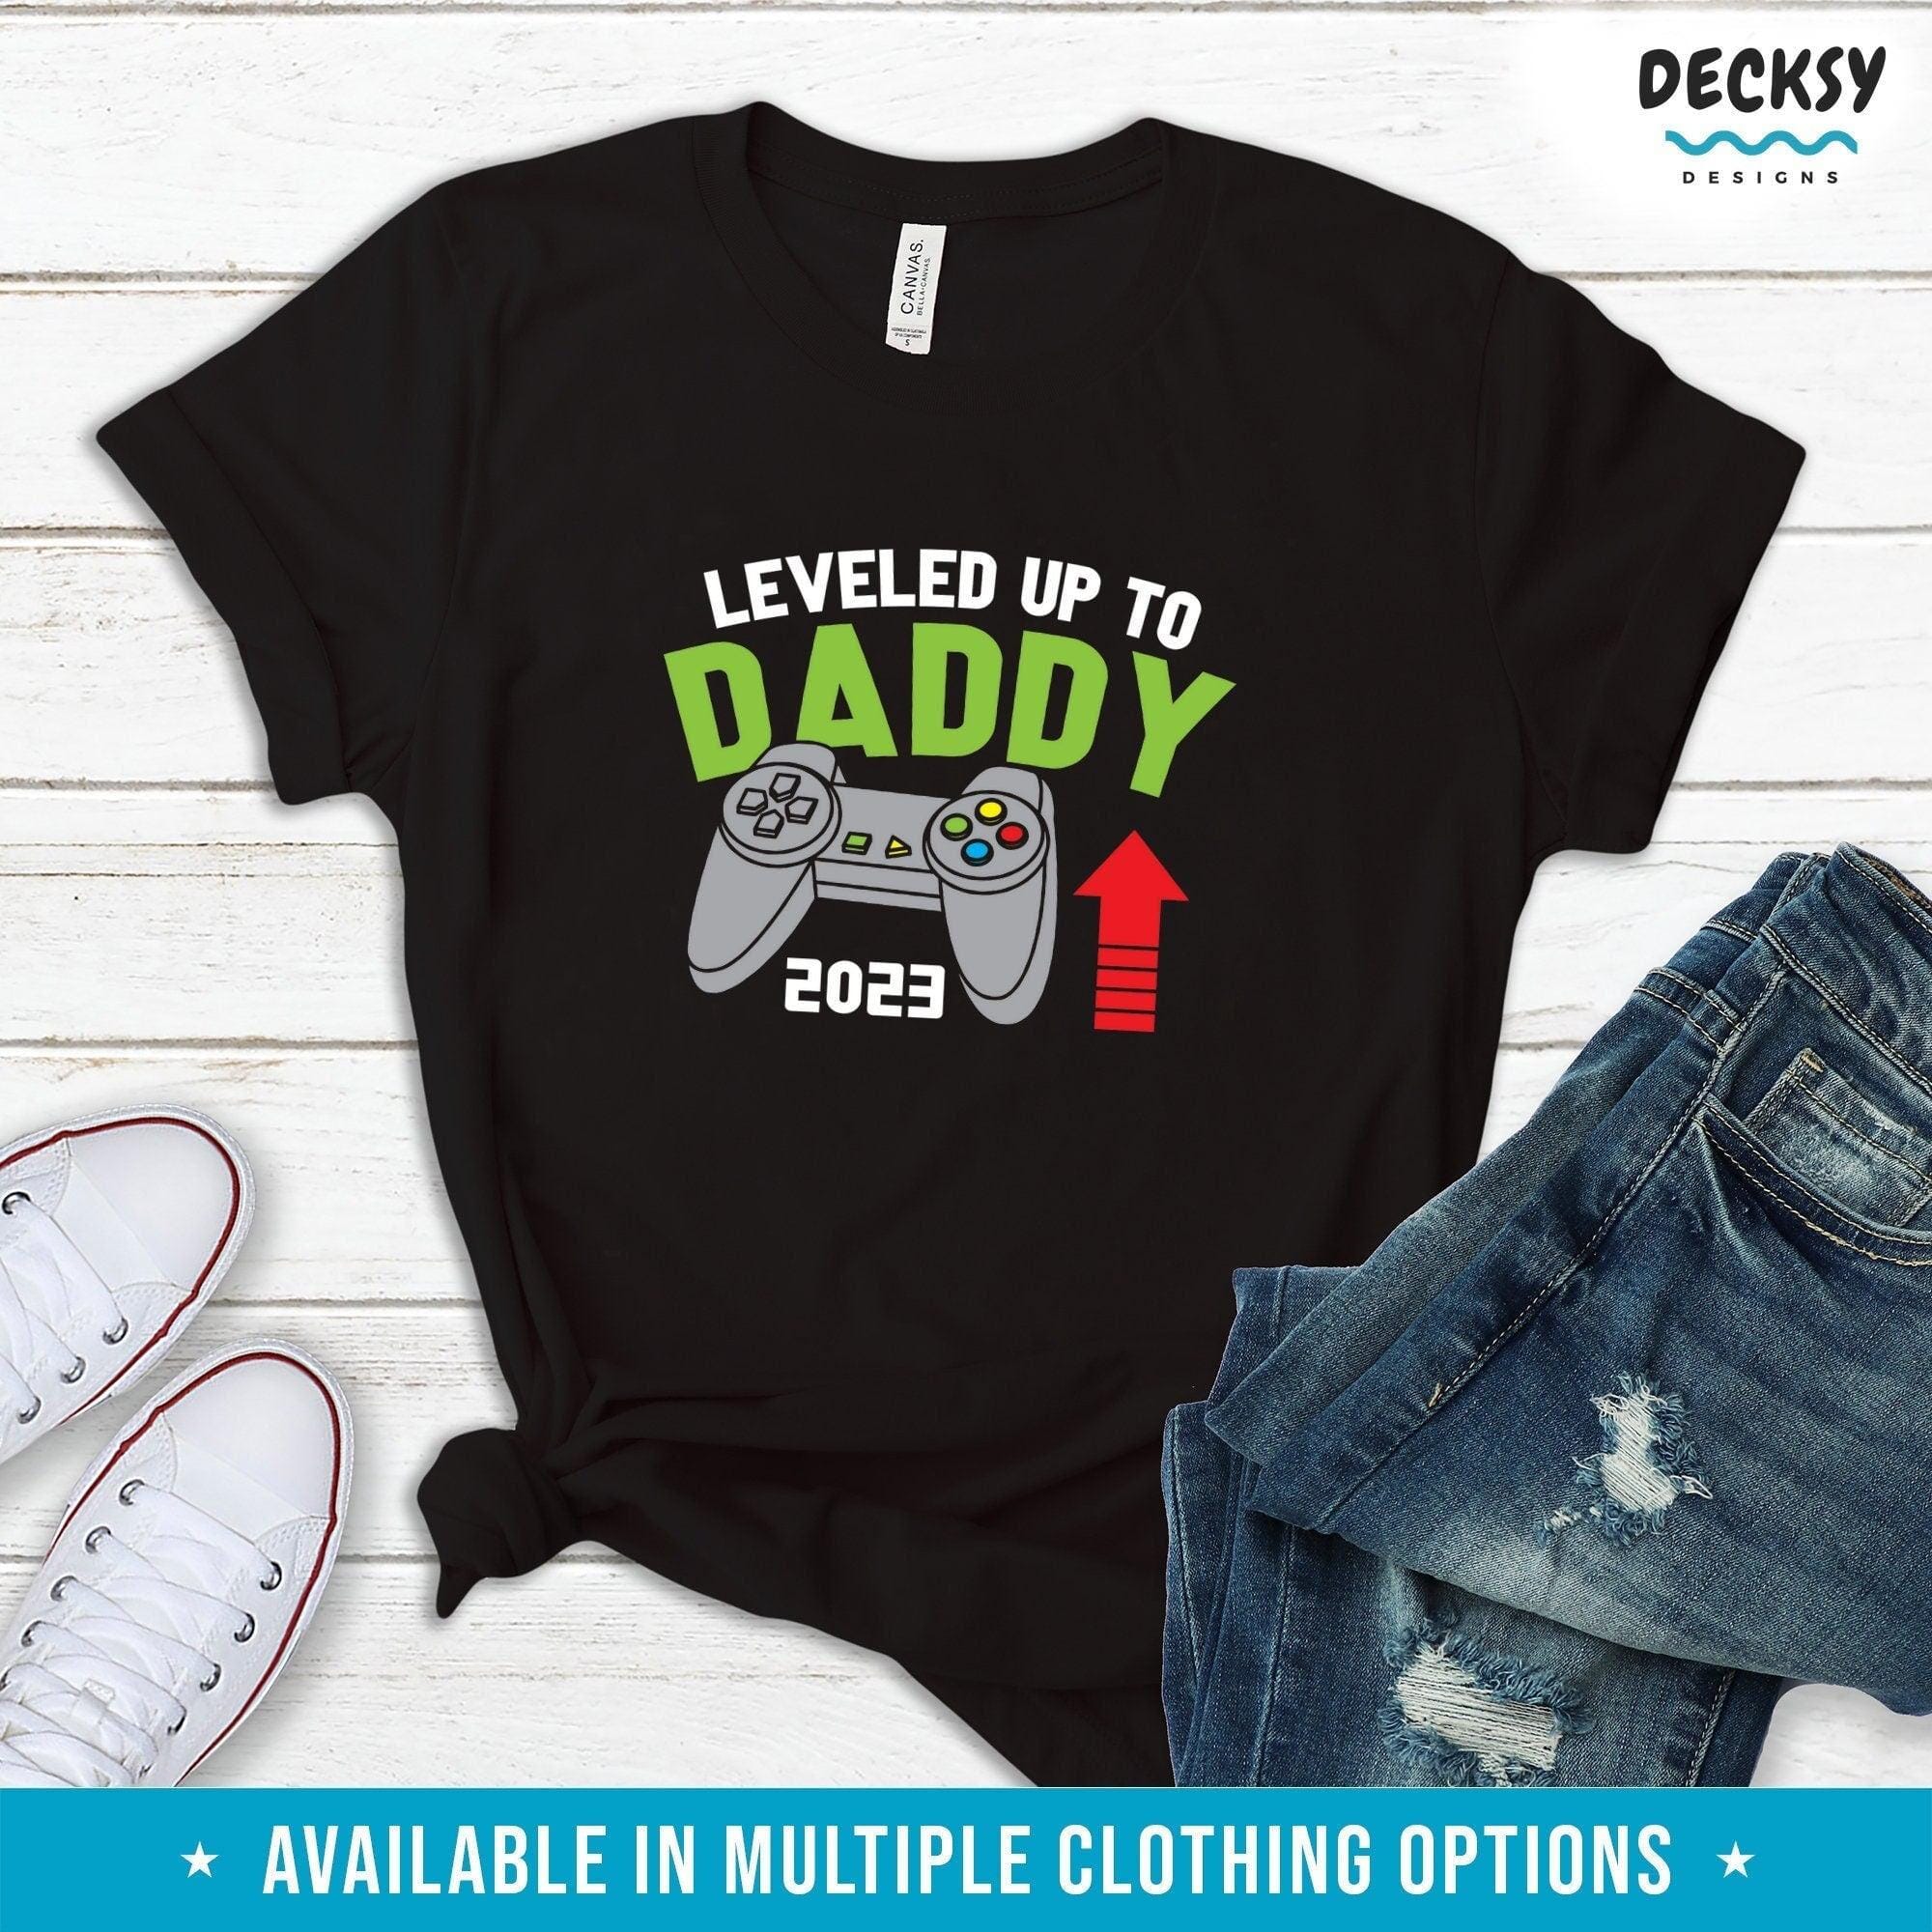 Dad To Be 2023 Shirt, Gaming Dad Gift-Clothing:Gender-Neutral Adult Clothing:Tops & Tees:T-shirts:Graphic Tees-DecksyDesigns